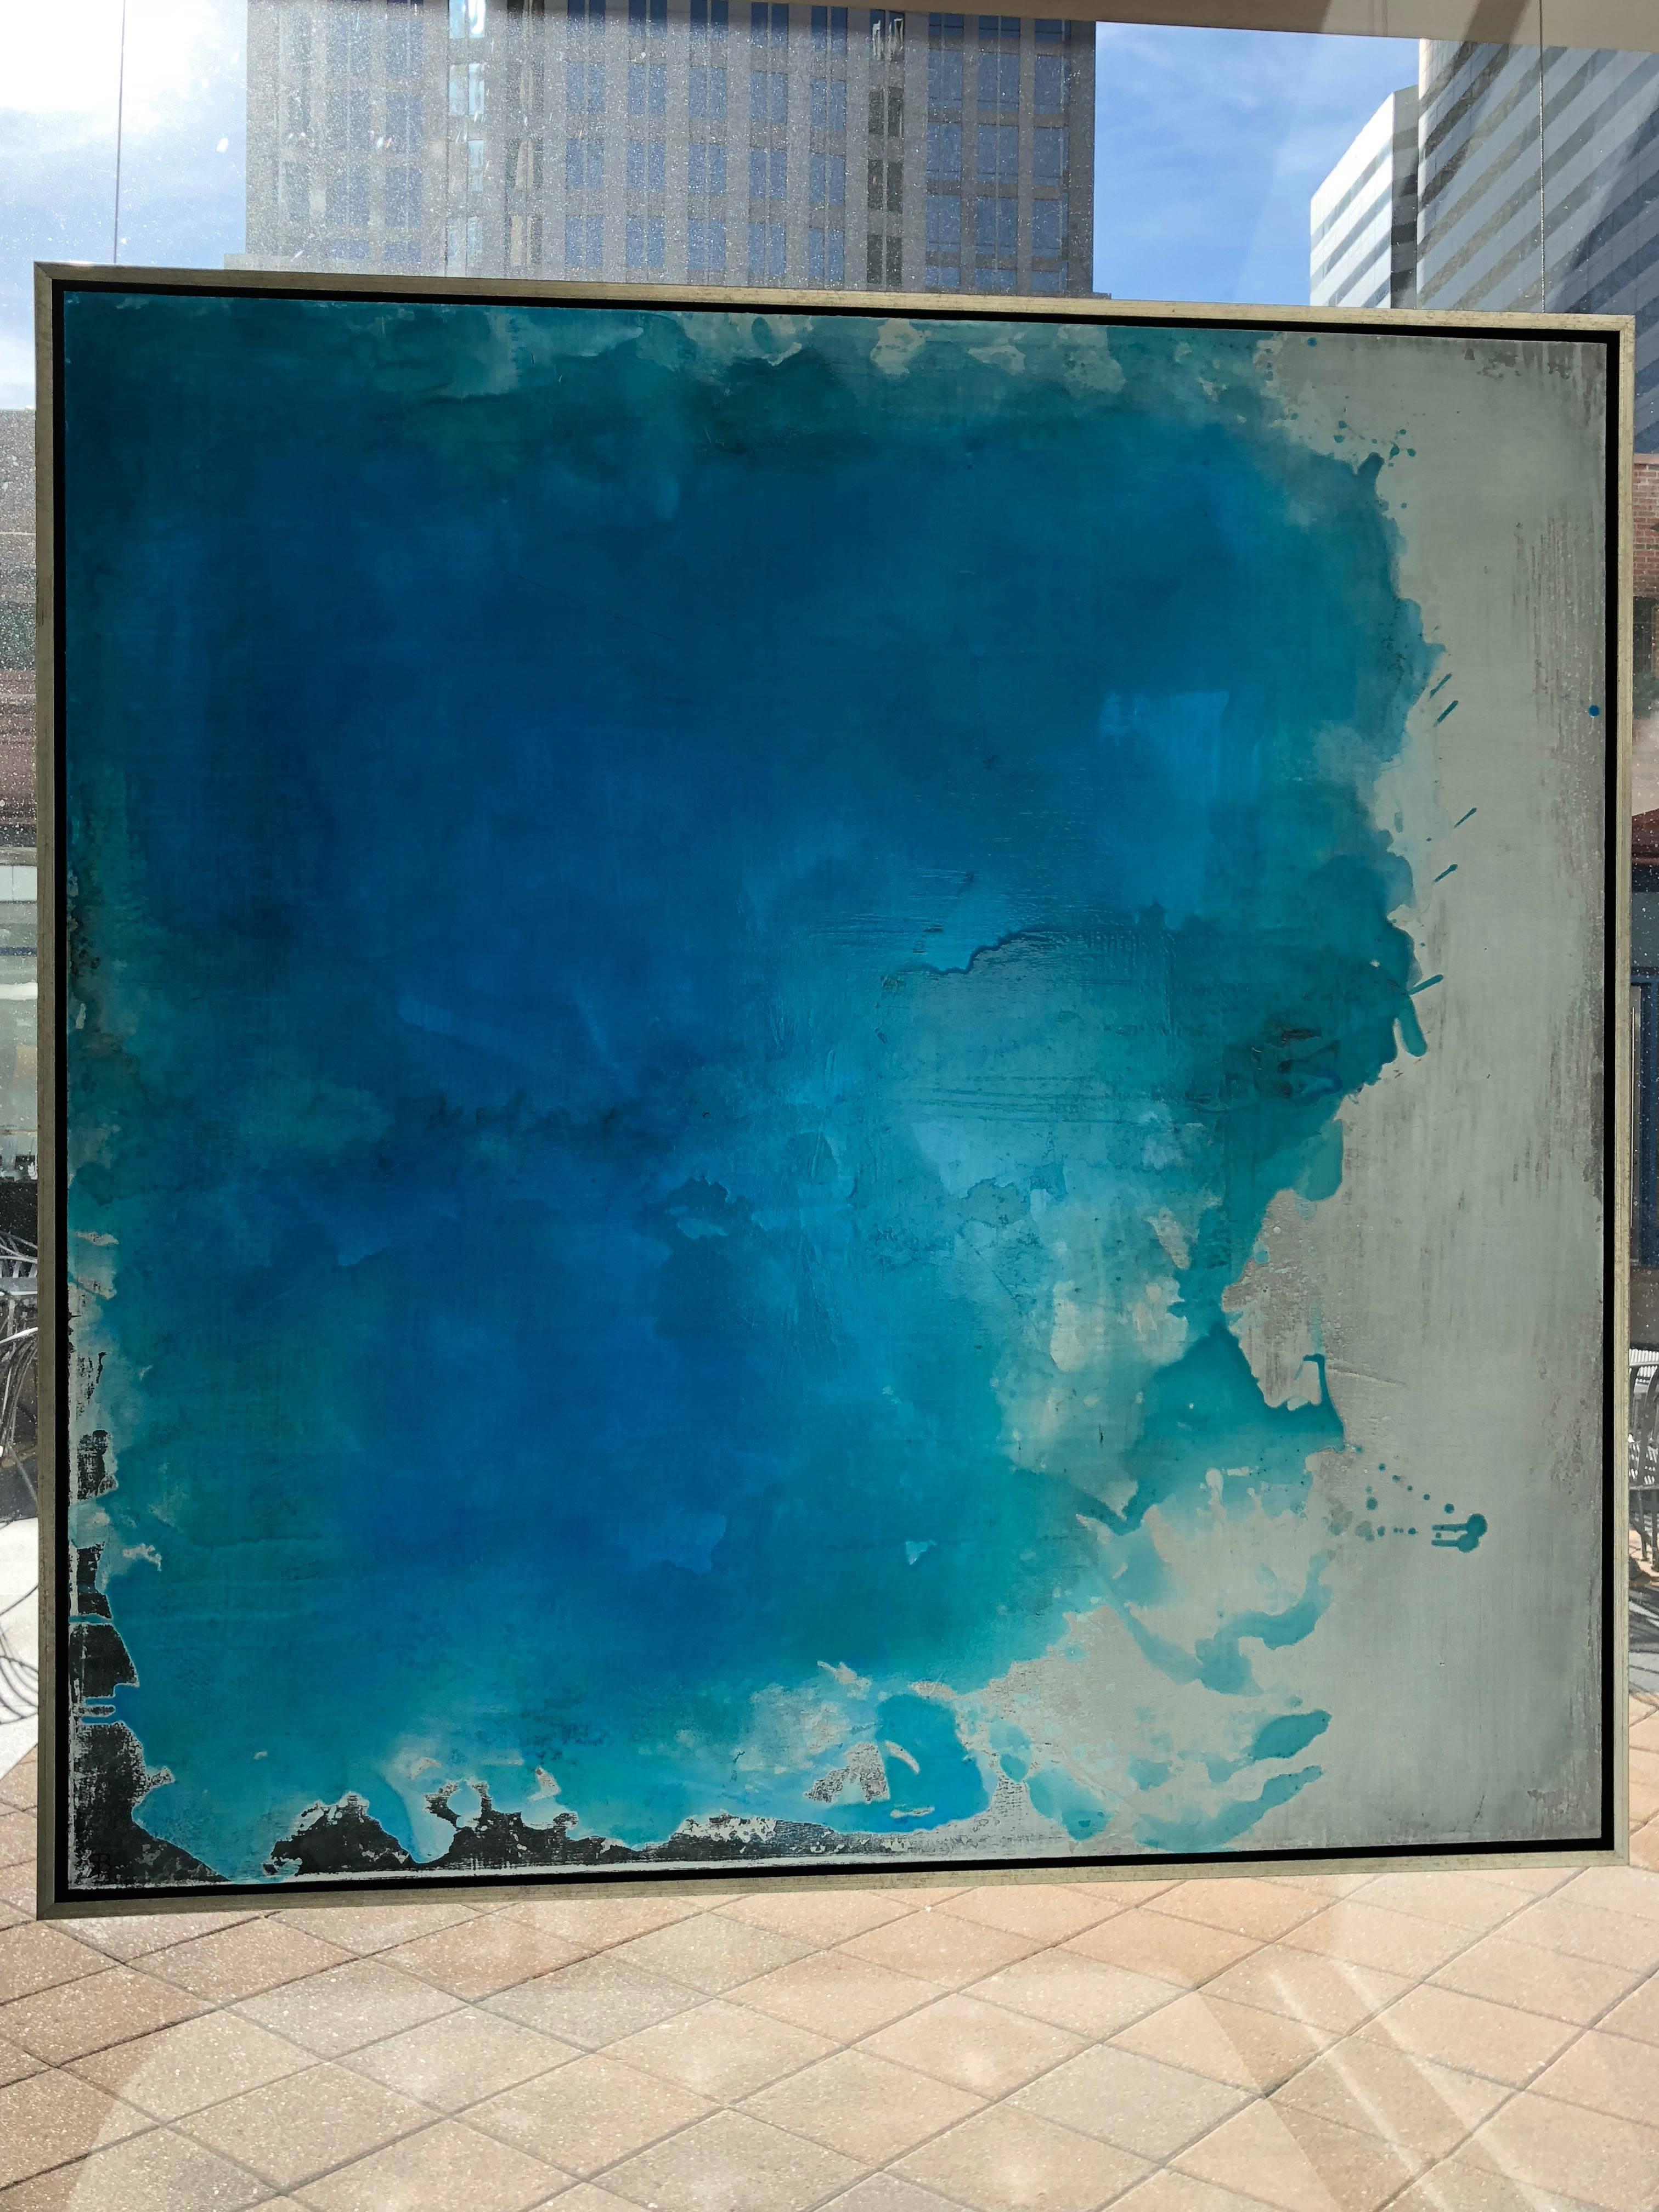 This vibrant mixed media piece gives bursts of rich turquoise, teal, white and grays that create a dream like feel. With the use of varying textures - moving between cracks and smooth surfaces- the artist creates an interesting and depth filled